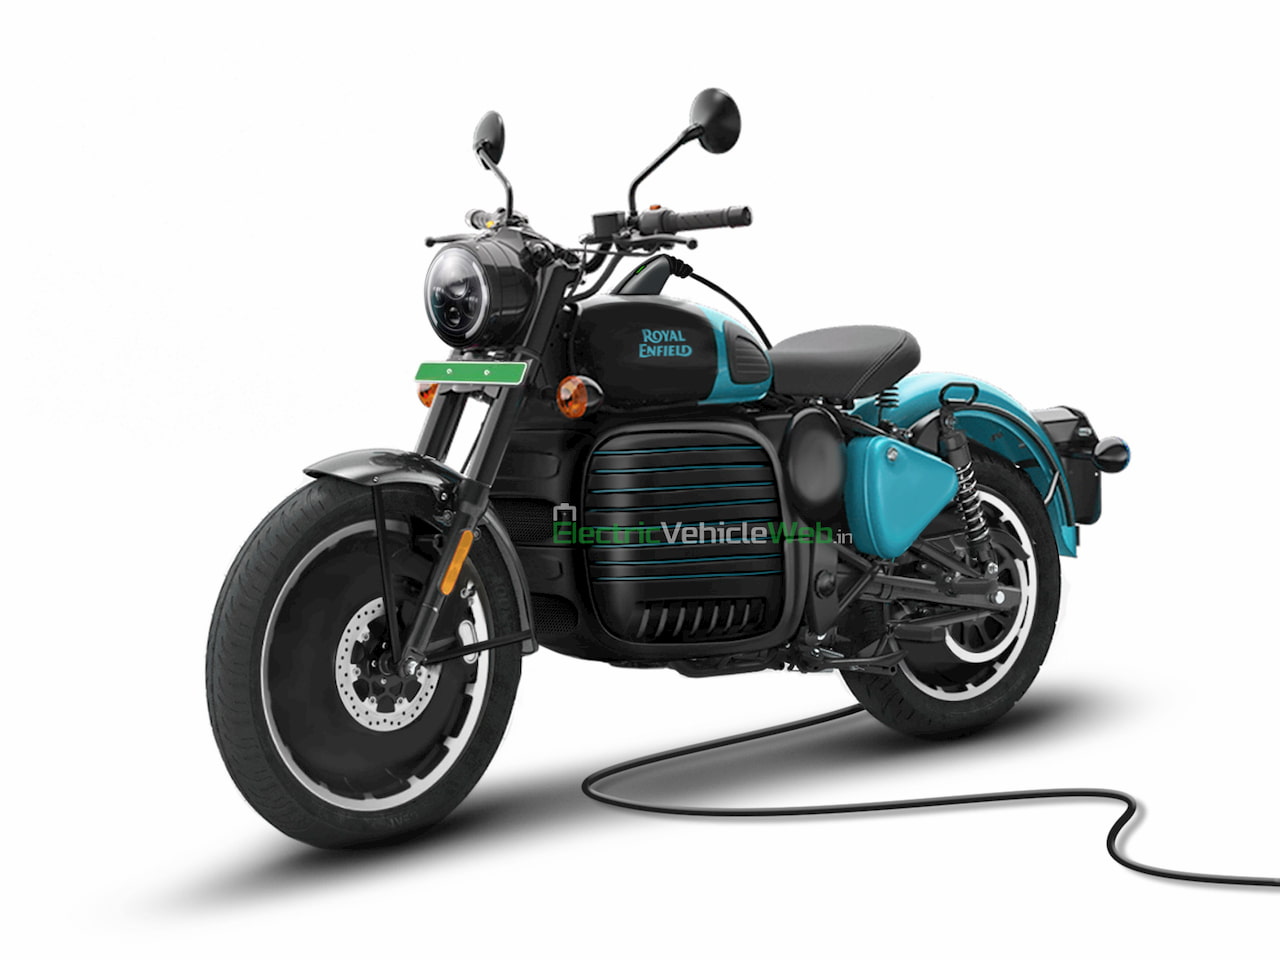 Royal Enfield electric bike based on the Classic rendering